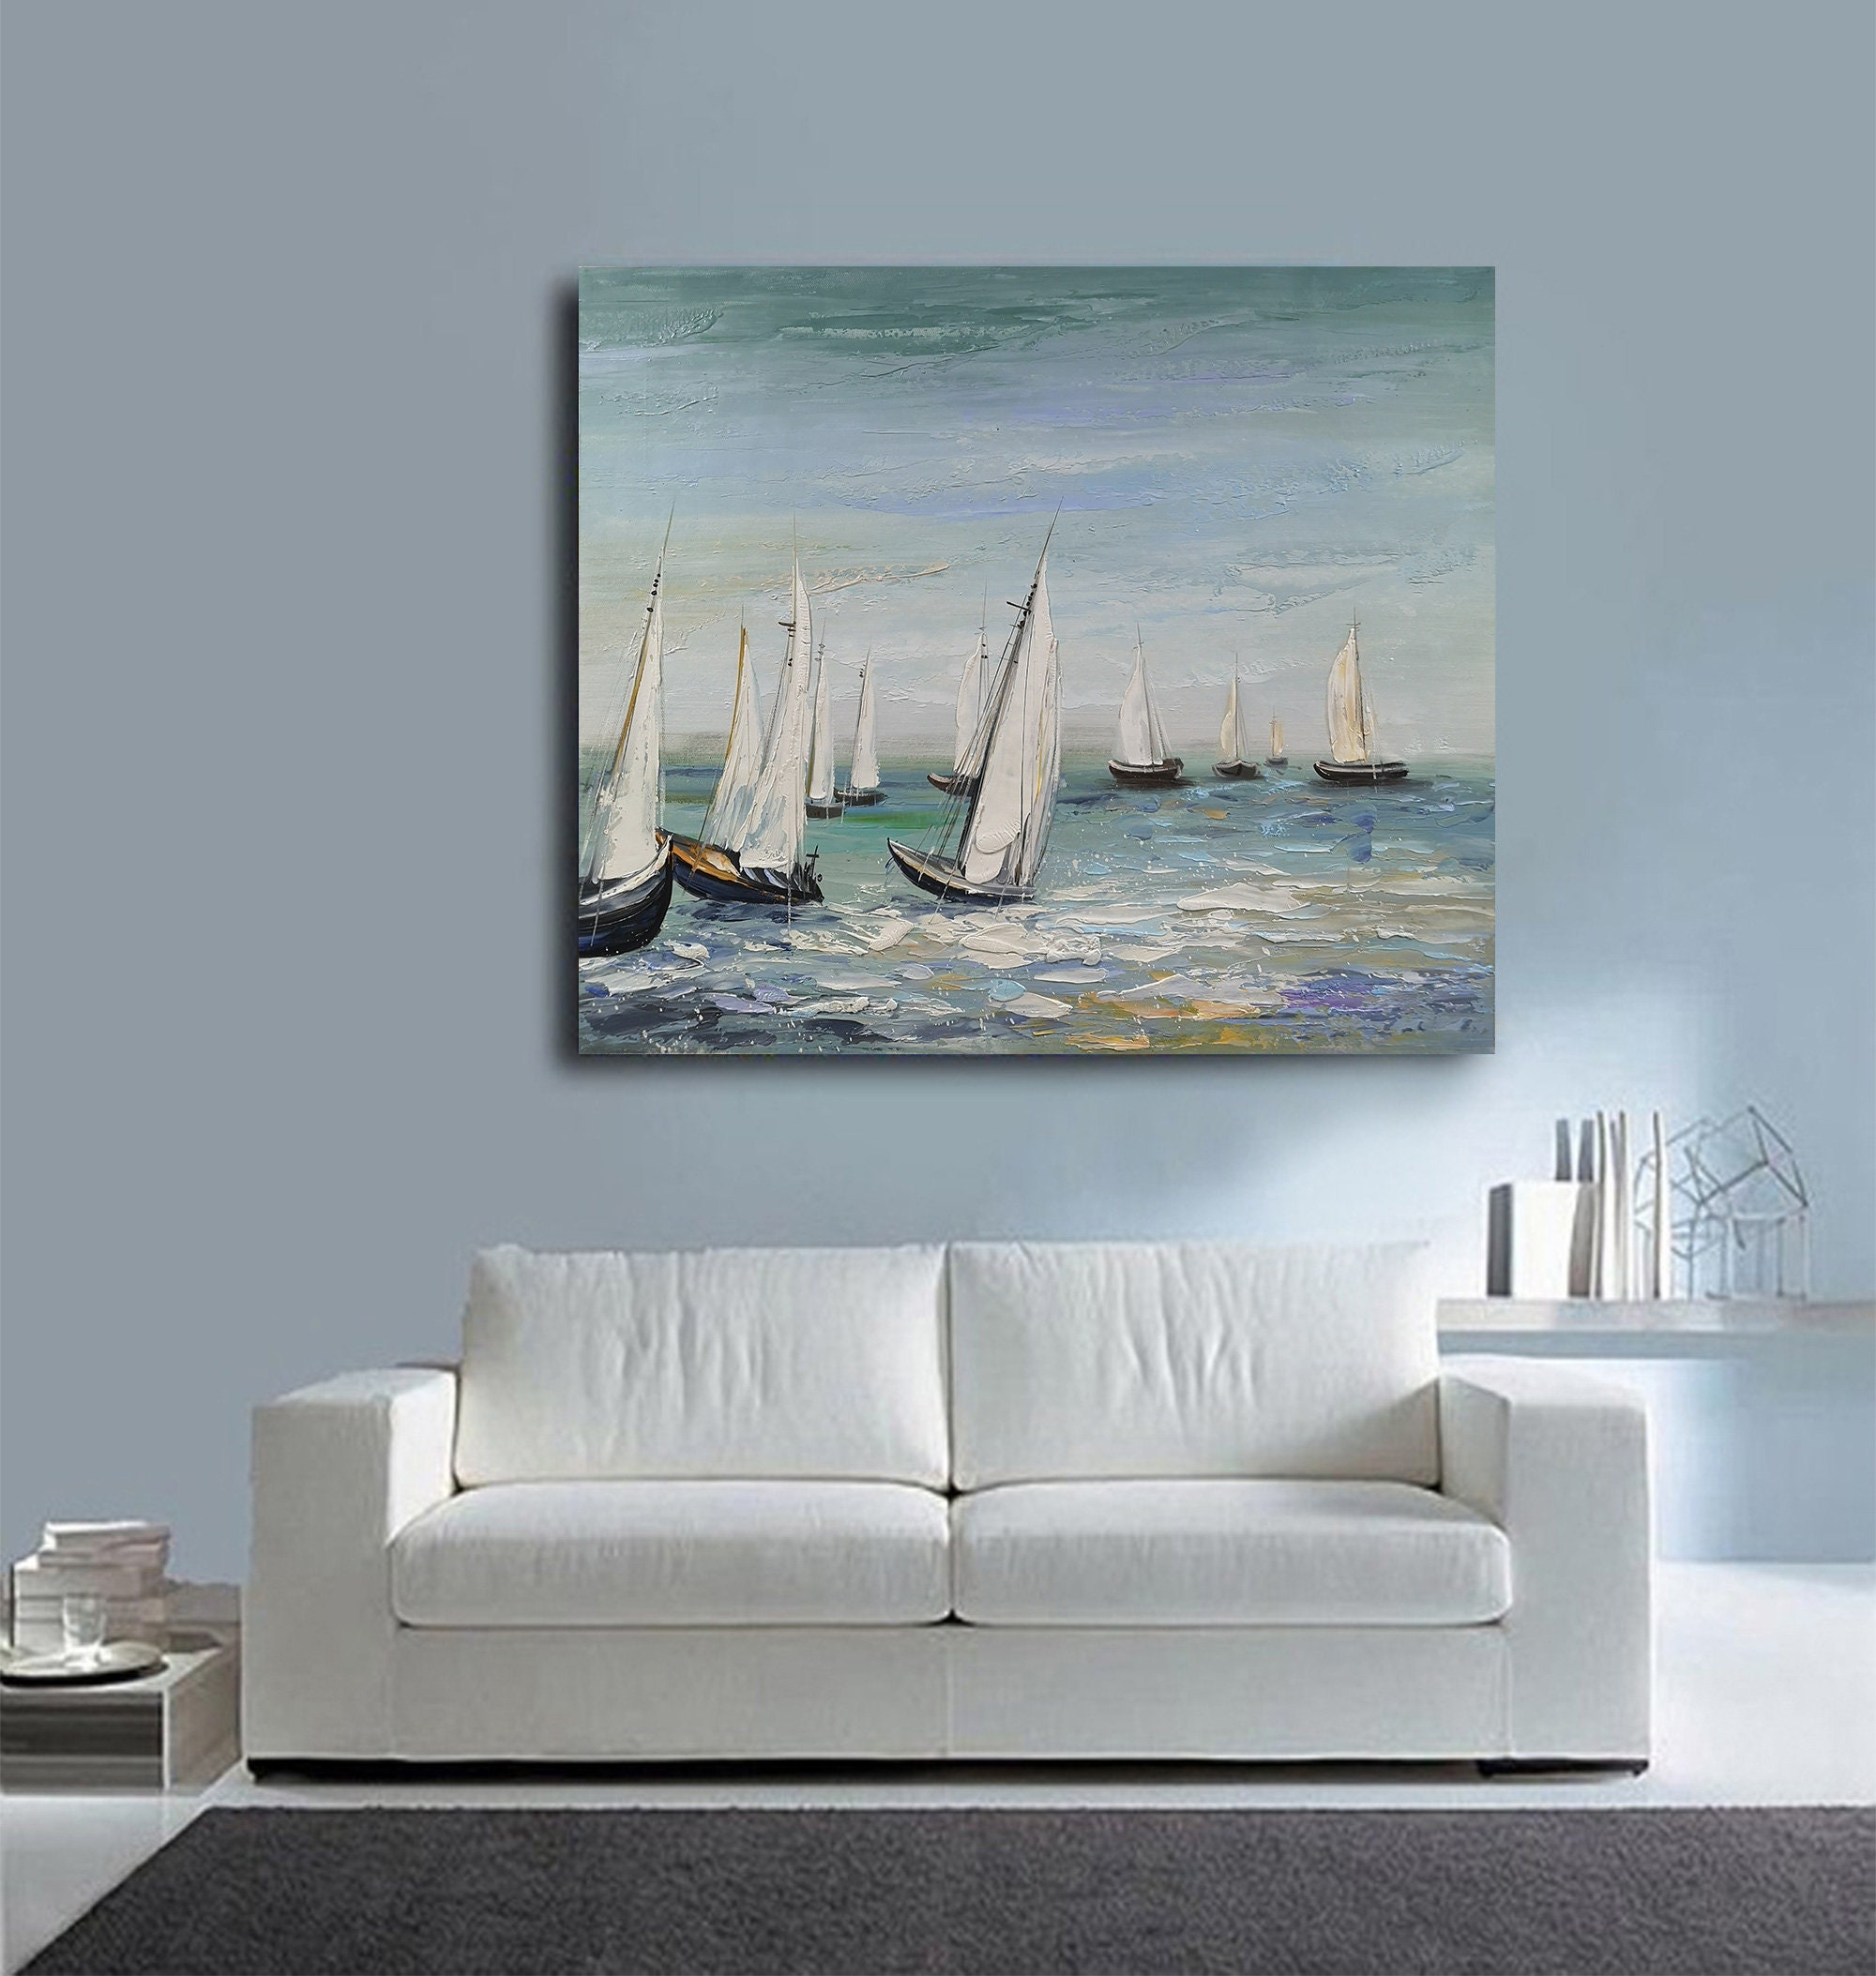 Blue Seascape Painting Large Ocean Painting Sailboat Painting | Etsy